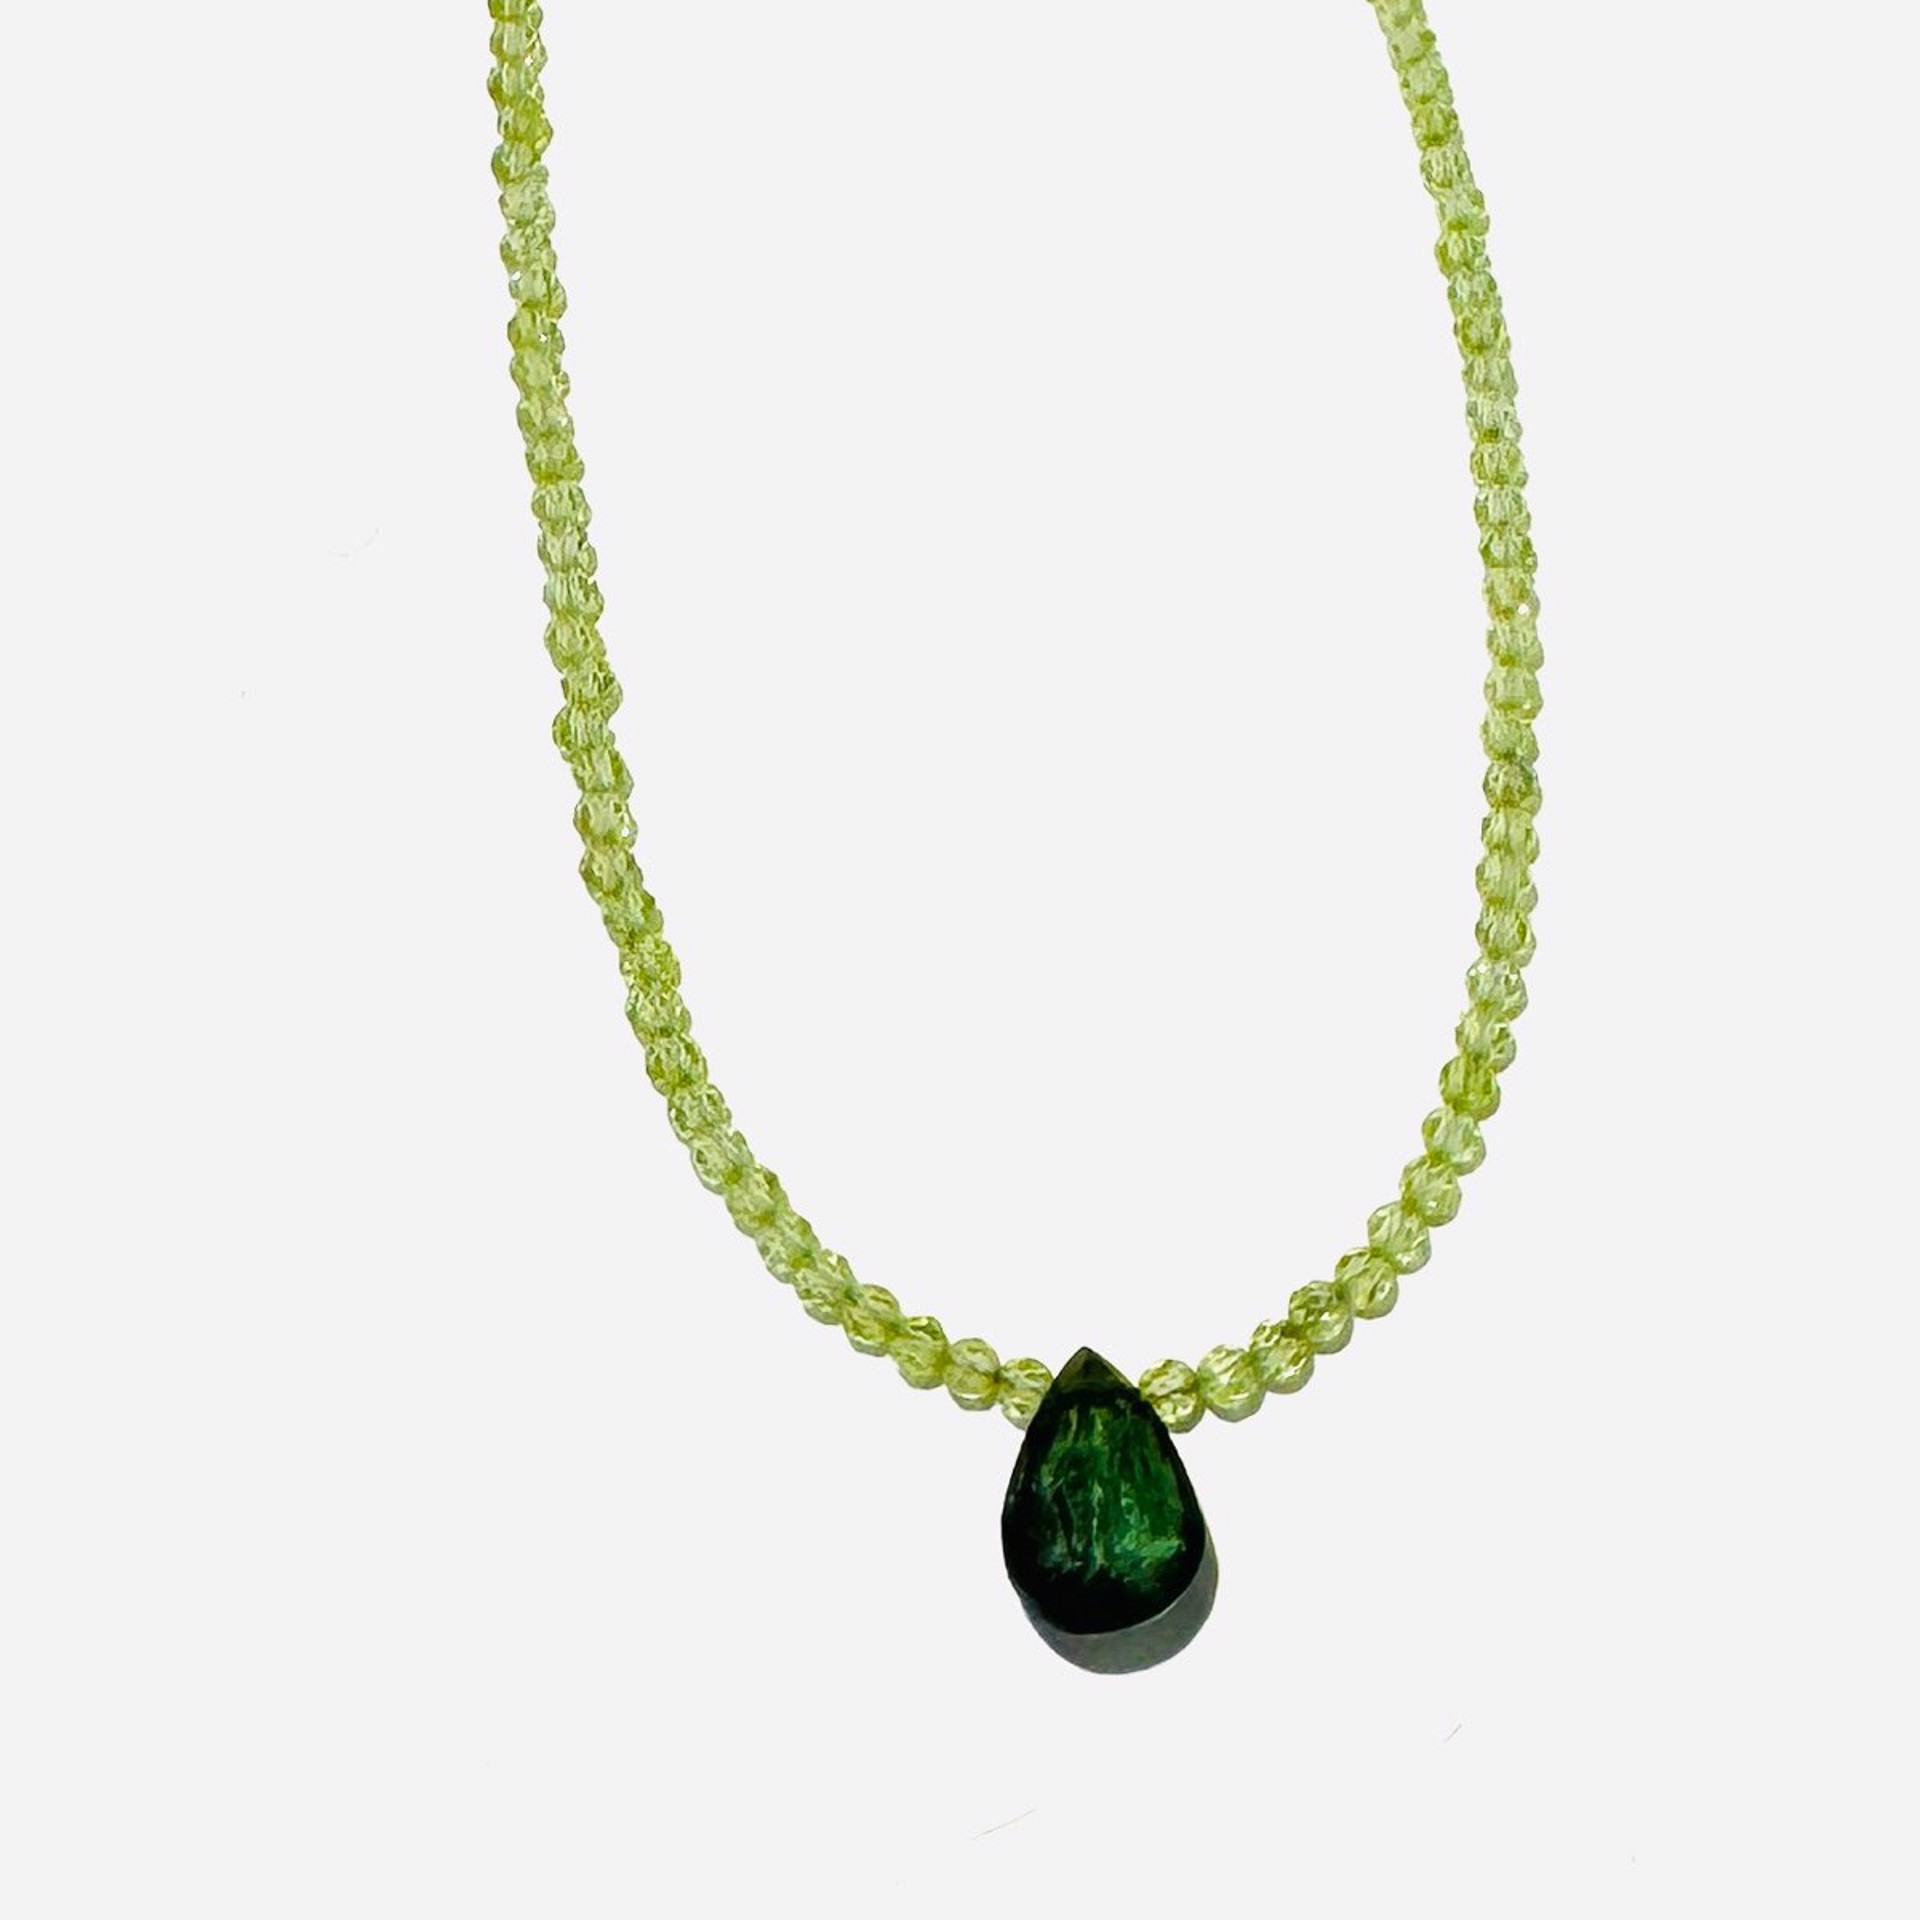 Tiny Faceted Peridot, Fancy Cut Green Tourmaline Focal Necklace NT23-110 by Nance Trueworthy